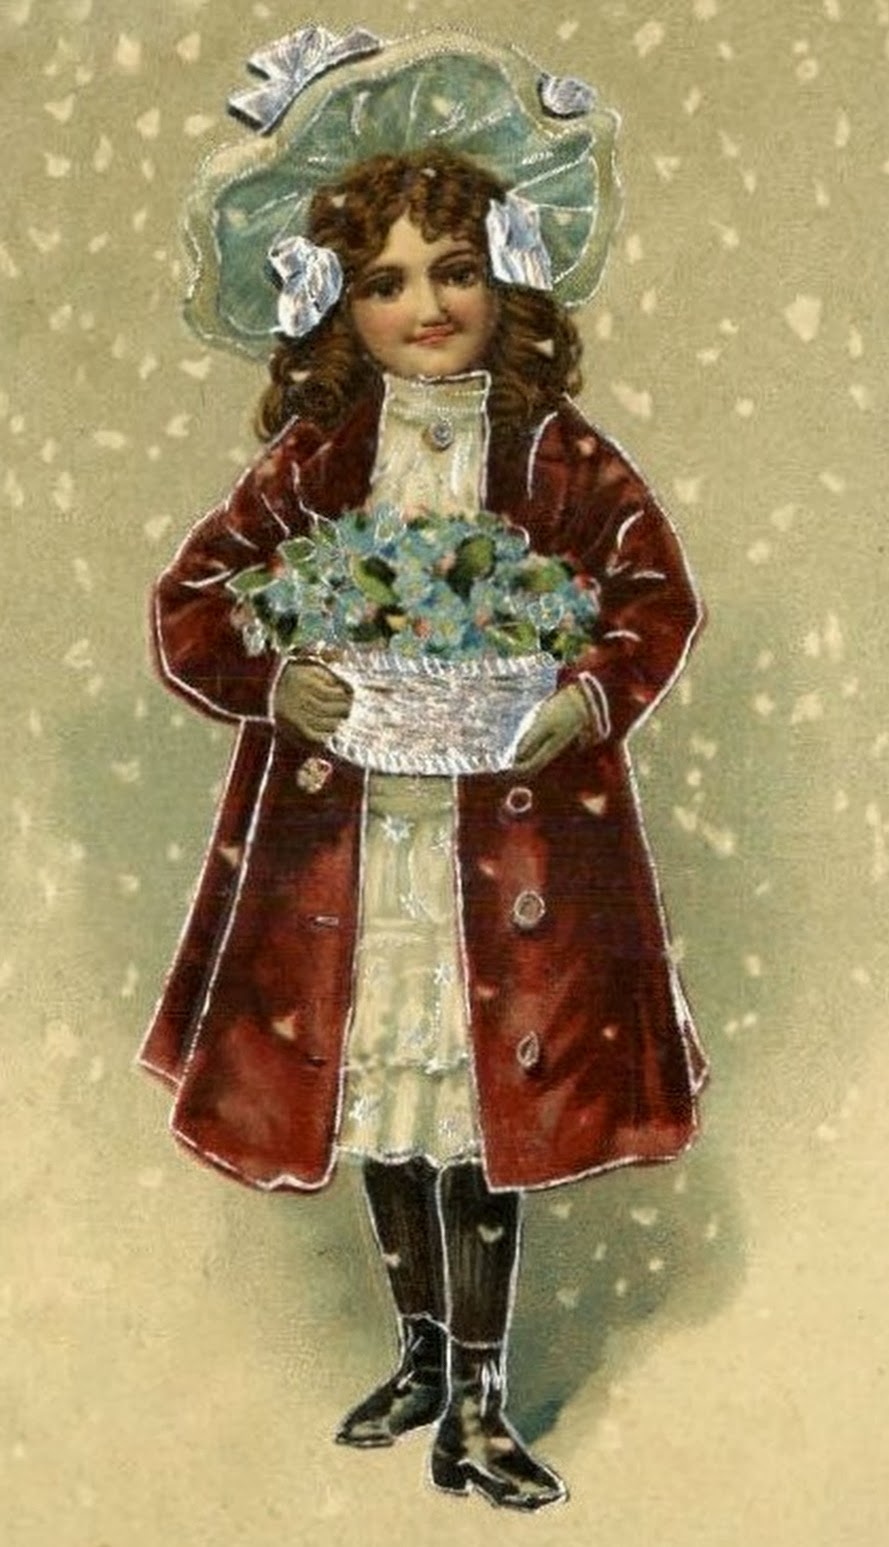 bumble button: Antique postcards of Charming Children in Red Christmas ...